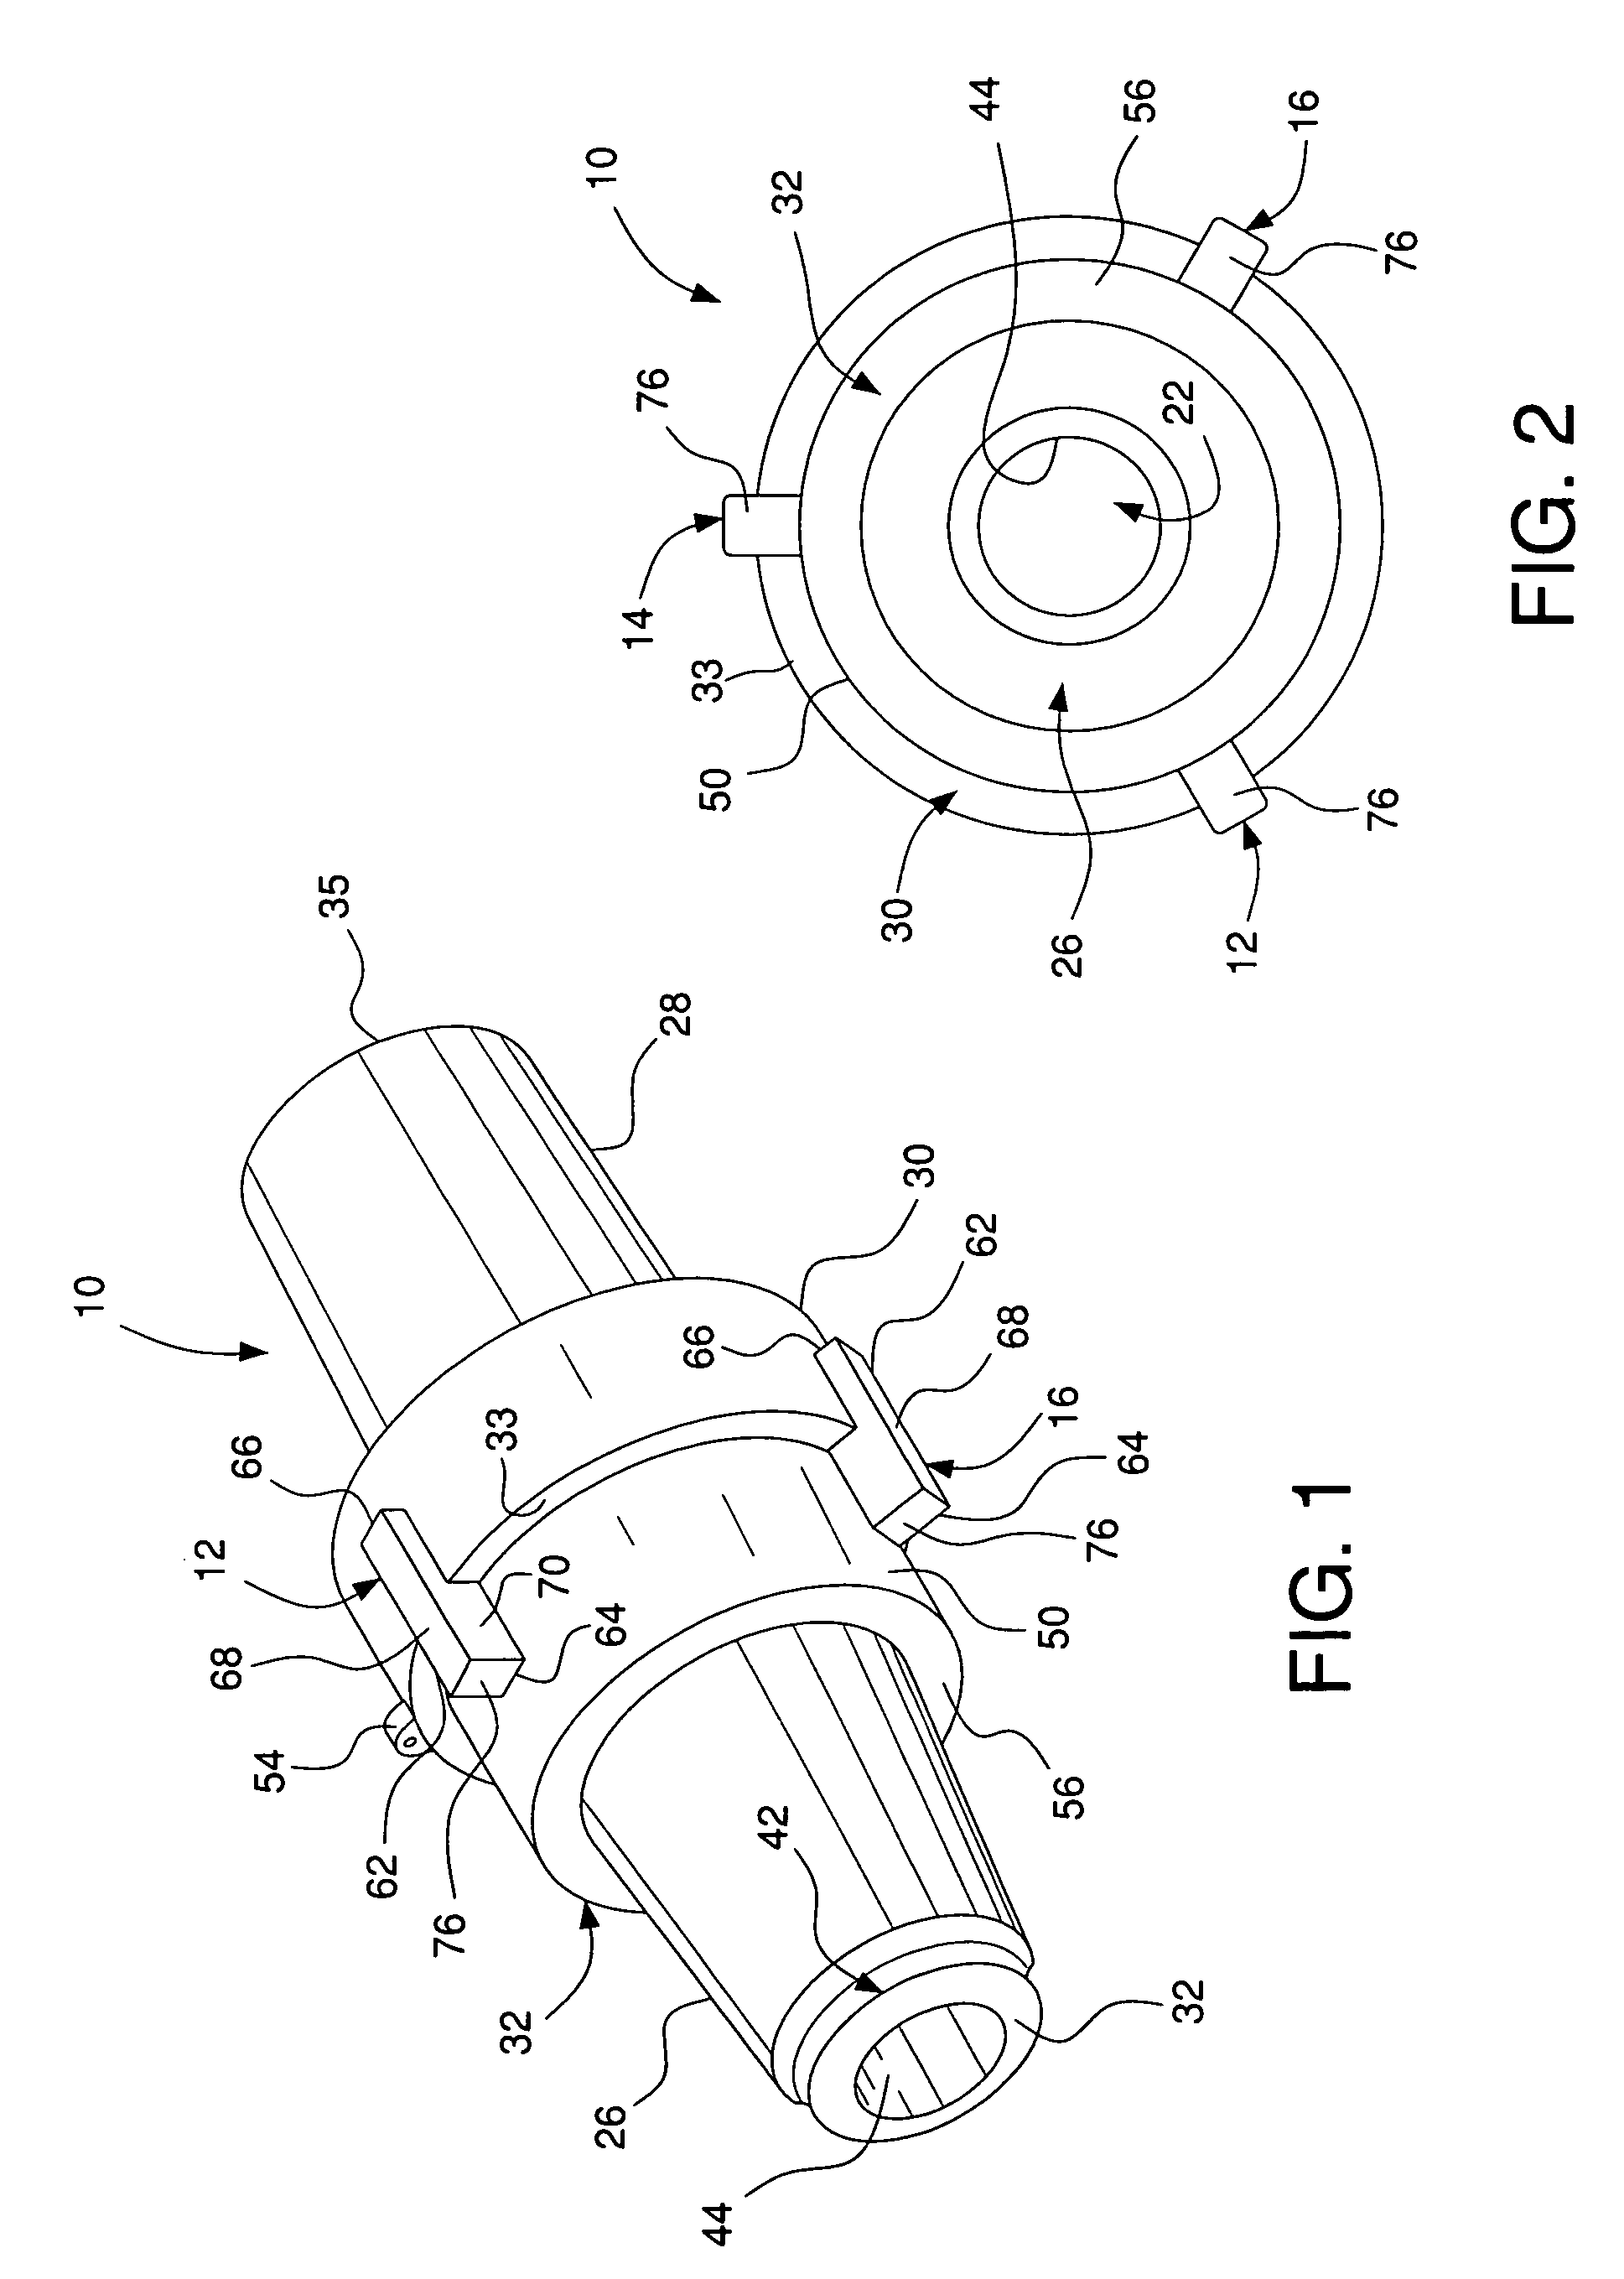 Electrical connector with seating indicator